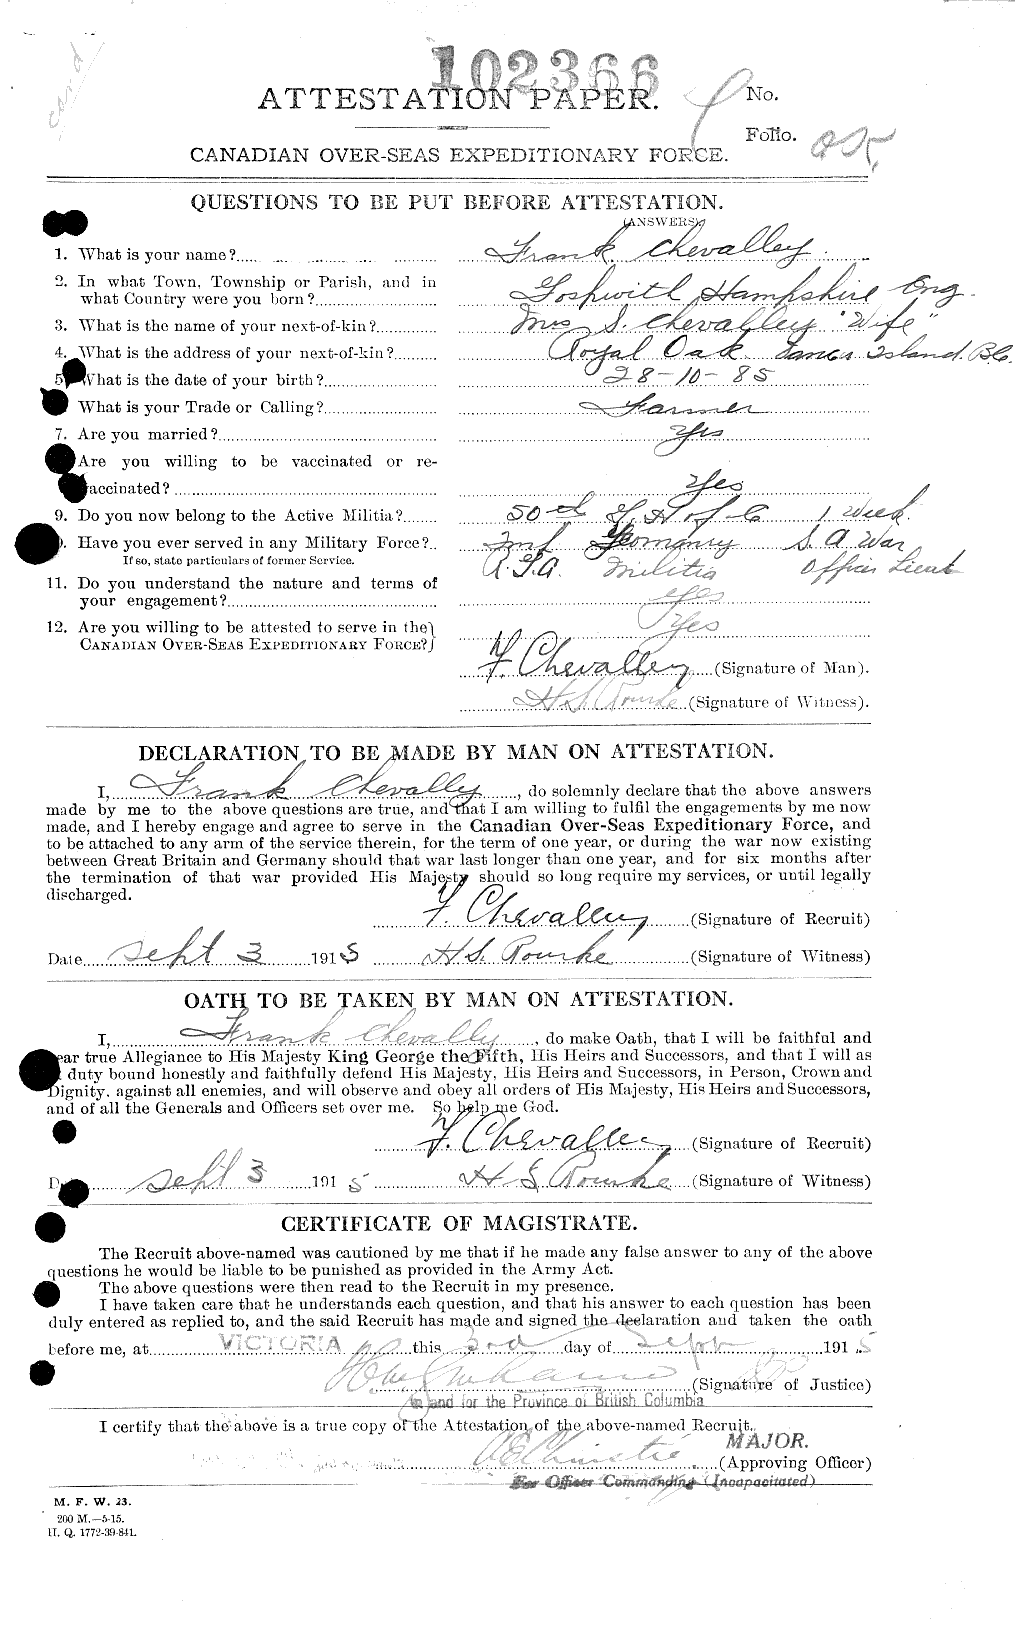 Personnel Records of the First World War - CEF 017802a